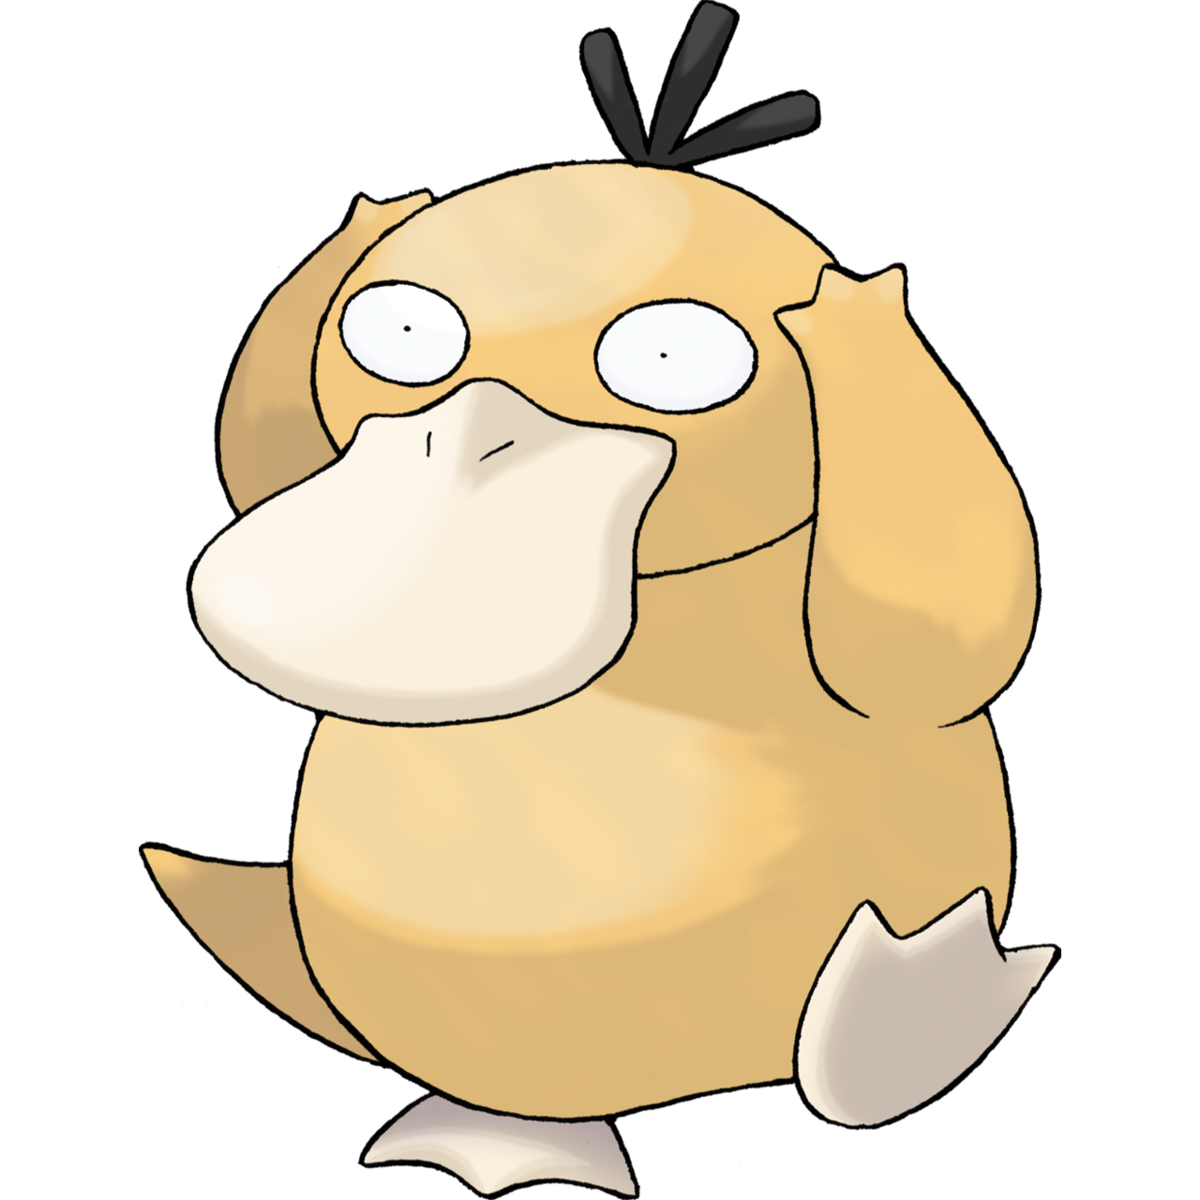 Psyduck-Pokemon-Background-PNG.png